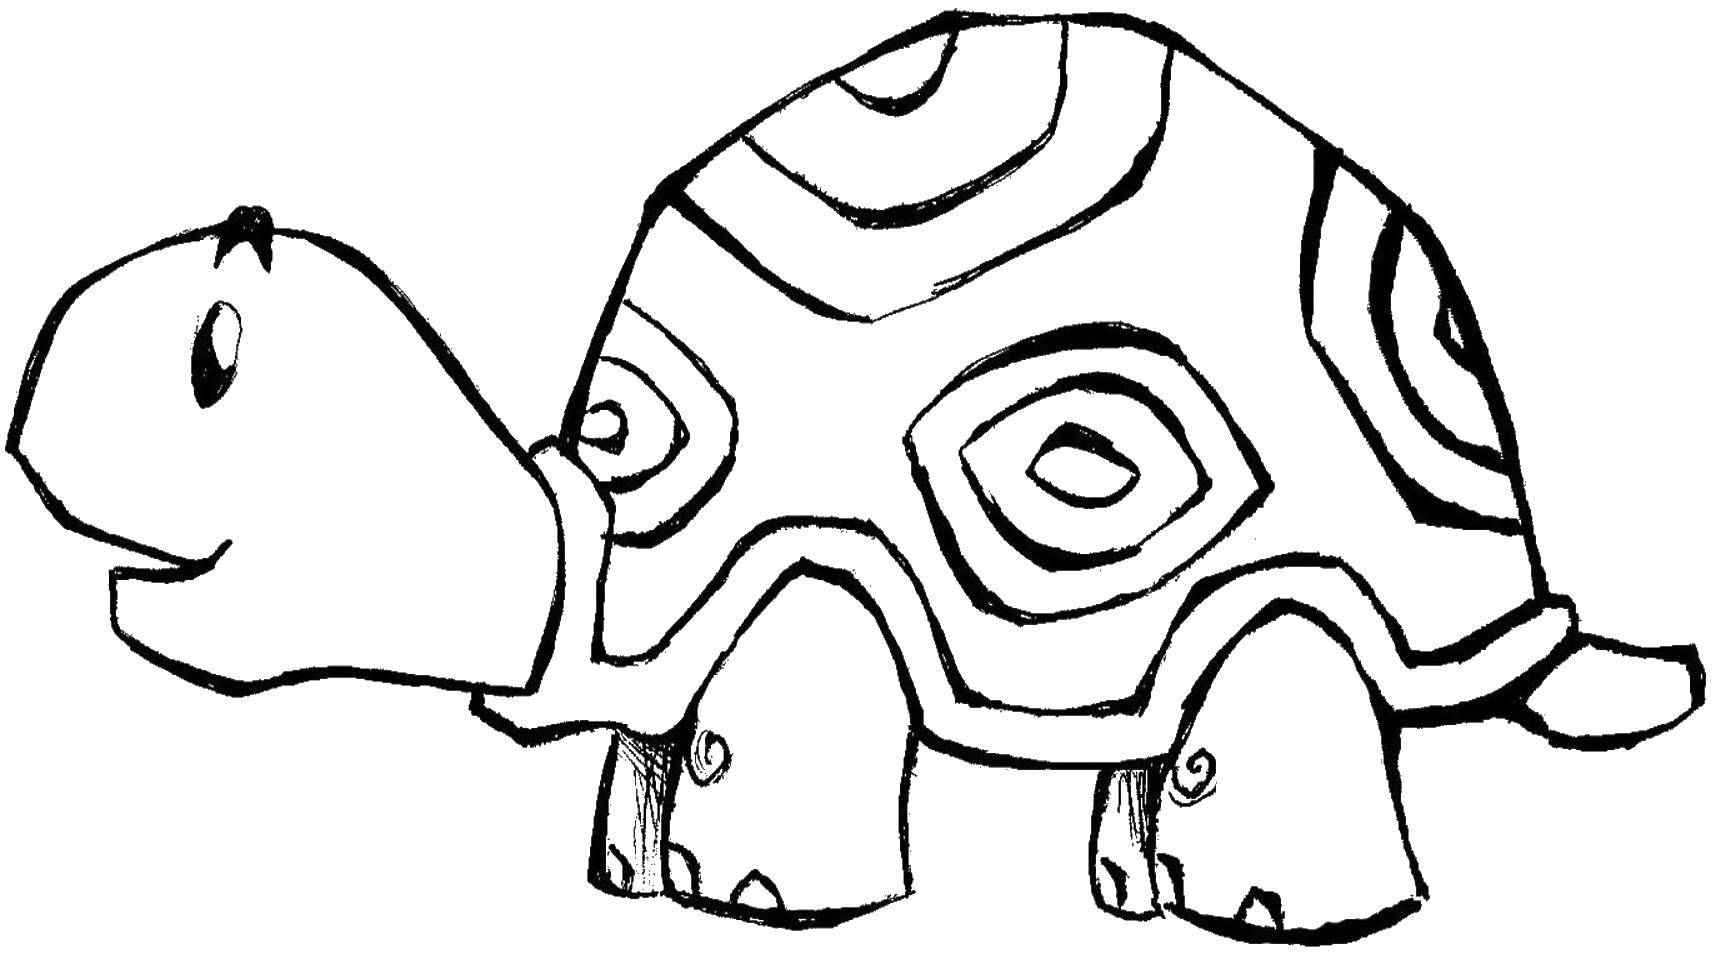 Coloring A turtle in a shell. Category coloring. Tags:  turtle, shell.